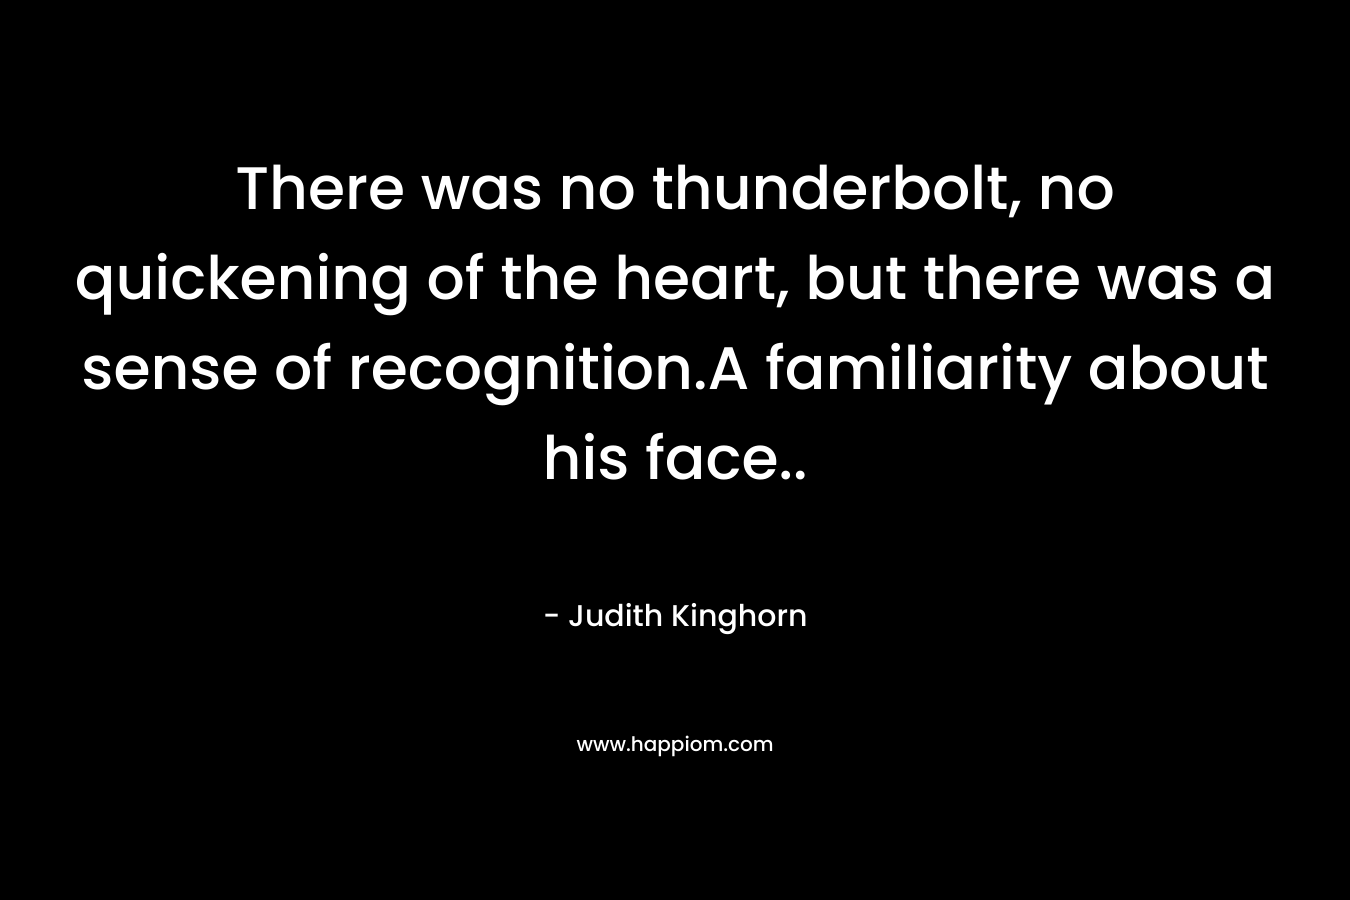 There was no thunderbolt, no quickening of the heart, but there was a sense of recognition.A familiarity about his face..